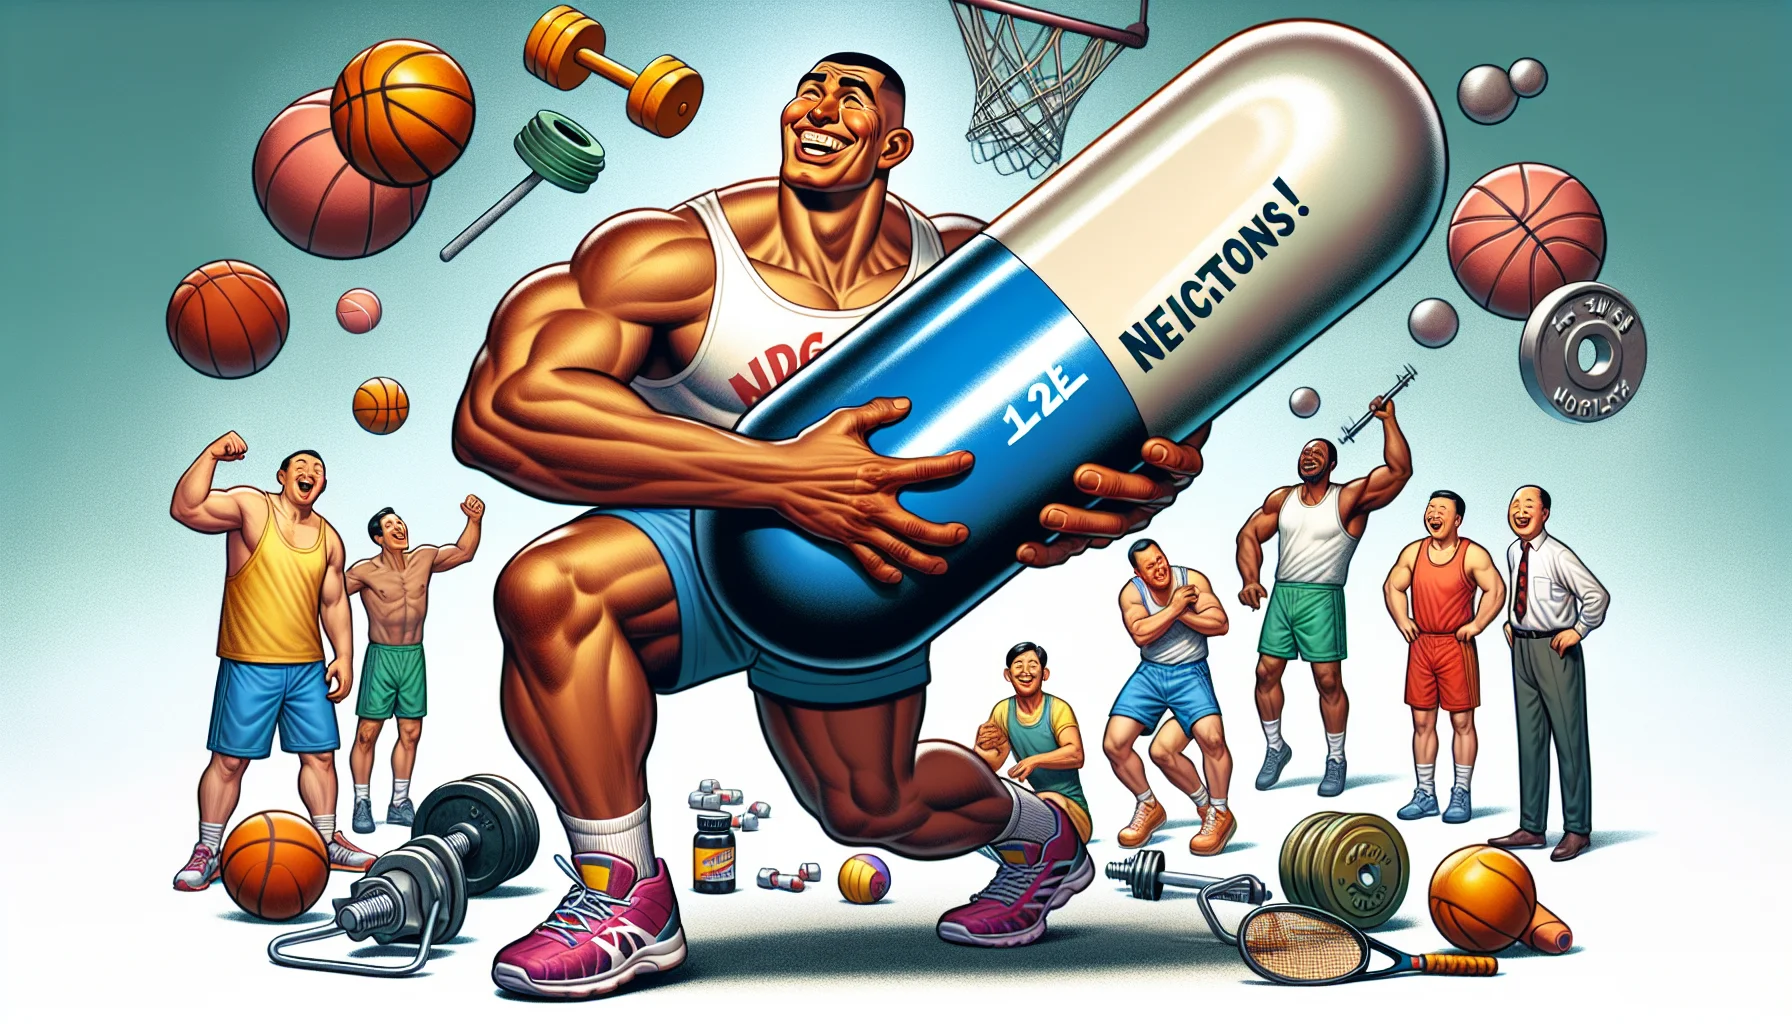 In a humorous scene depicting the world of sports supplements, there's a tall and muscular man, of Hispanic descent, playfully struggling to lift a giant magnesium pill. This pill has '12 Neutrons!' written on its side. It is a funny and metaphorical depiction of the nuclear aspect of magnesium, an essential mineral in sport supplements. Around the man, a variety of sports equipments such as basketballs, dumbbells and tennis rackets are scattered and a group of multi-ethnic athletes are seen laughing together in the background.